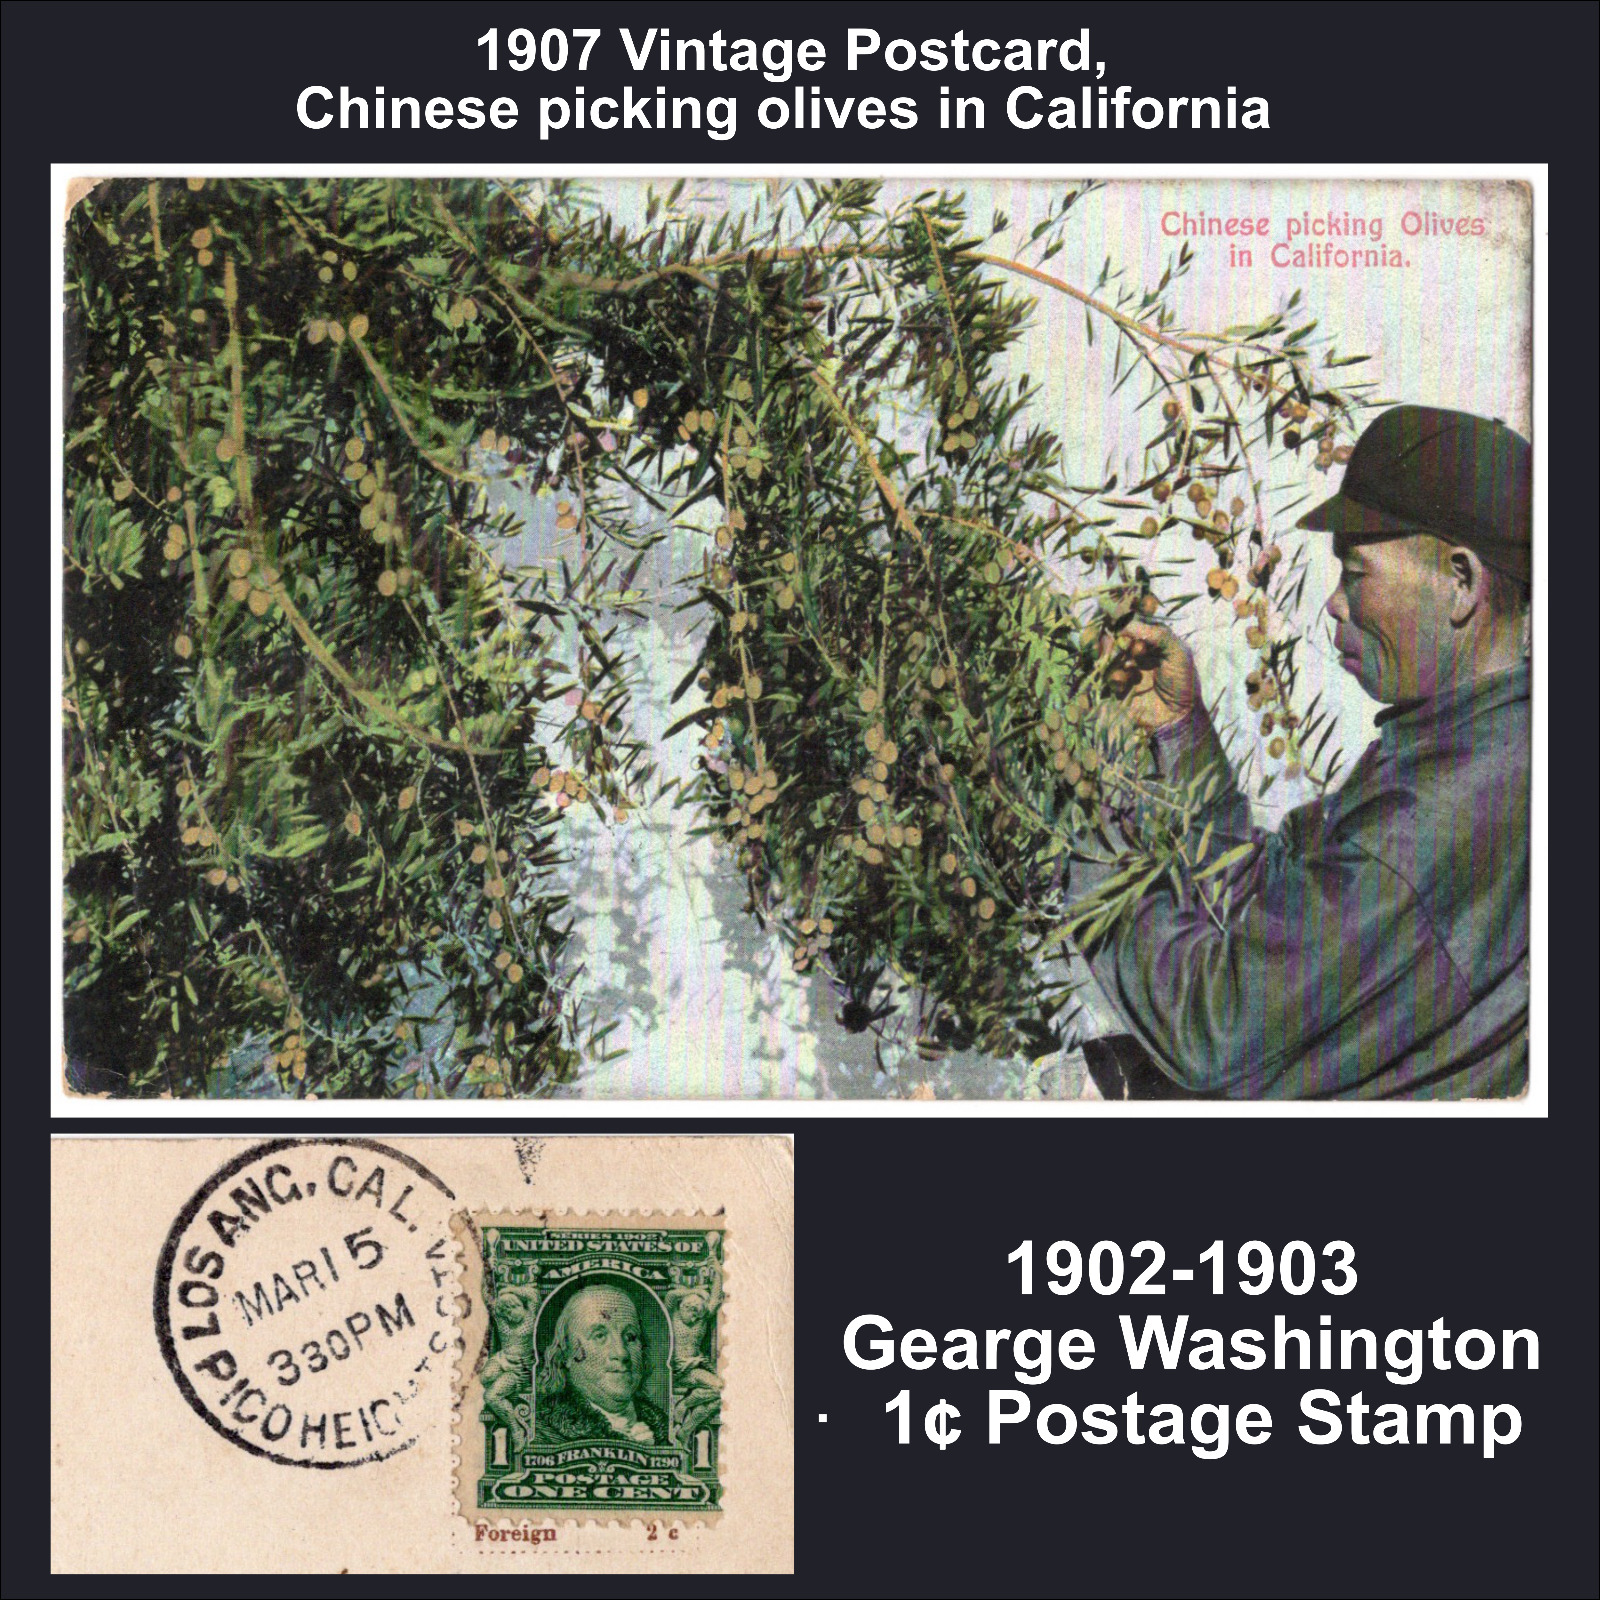 1907 Vinyage Postcard,Chinese picking olives in CA, Rare Washington 1 cent stamp